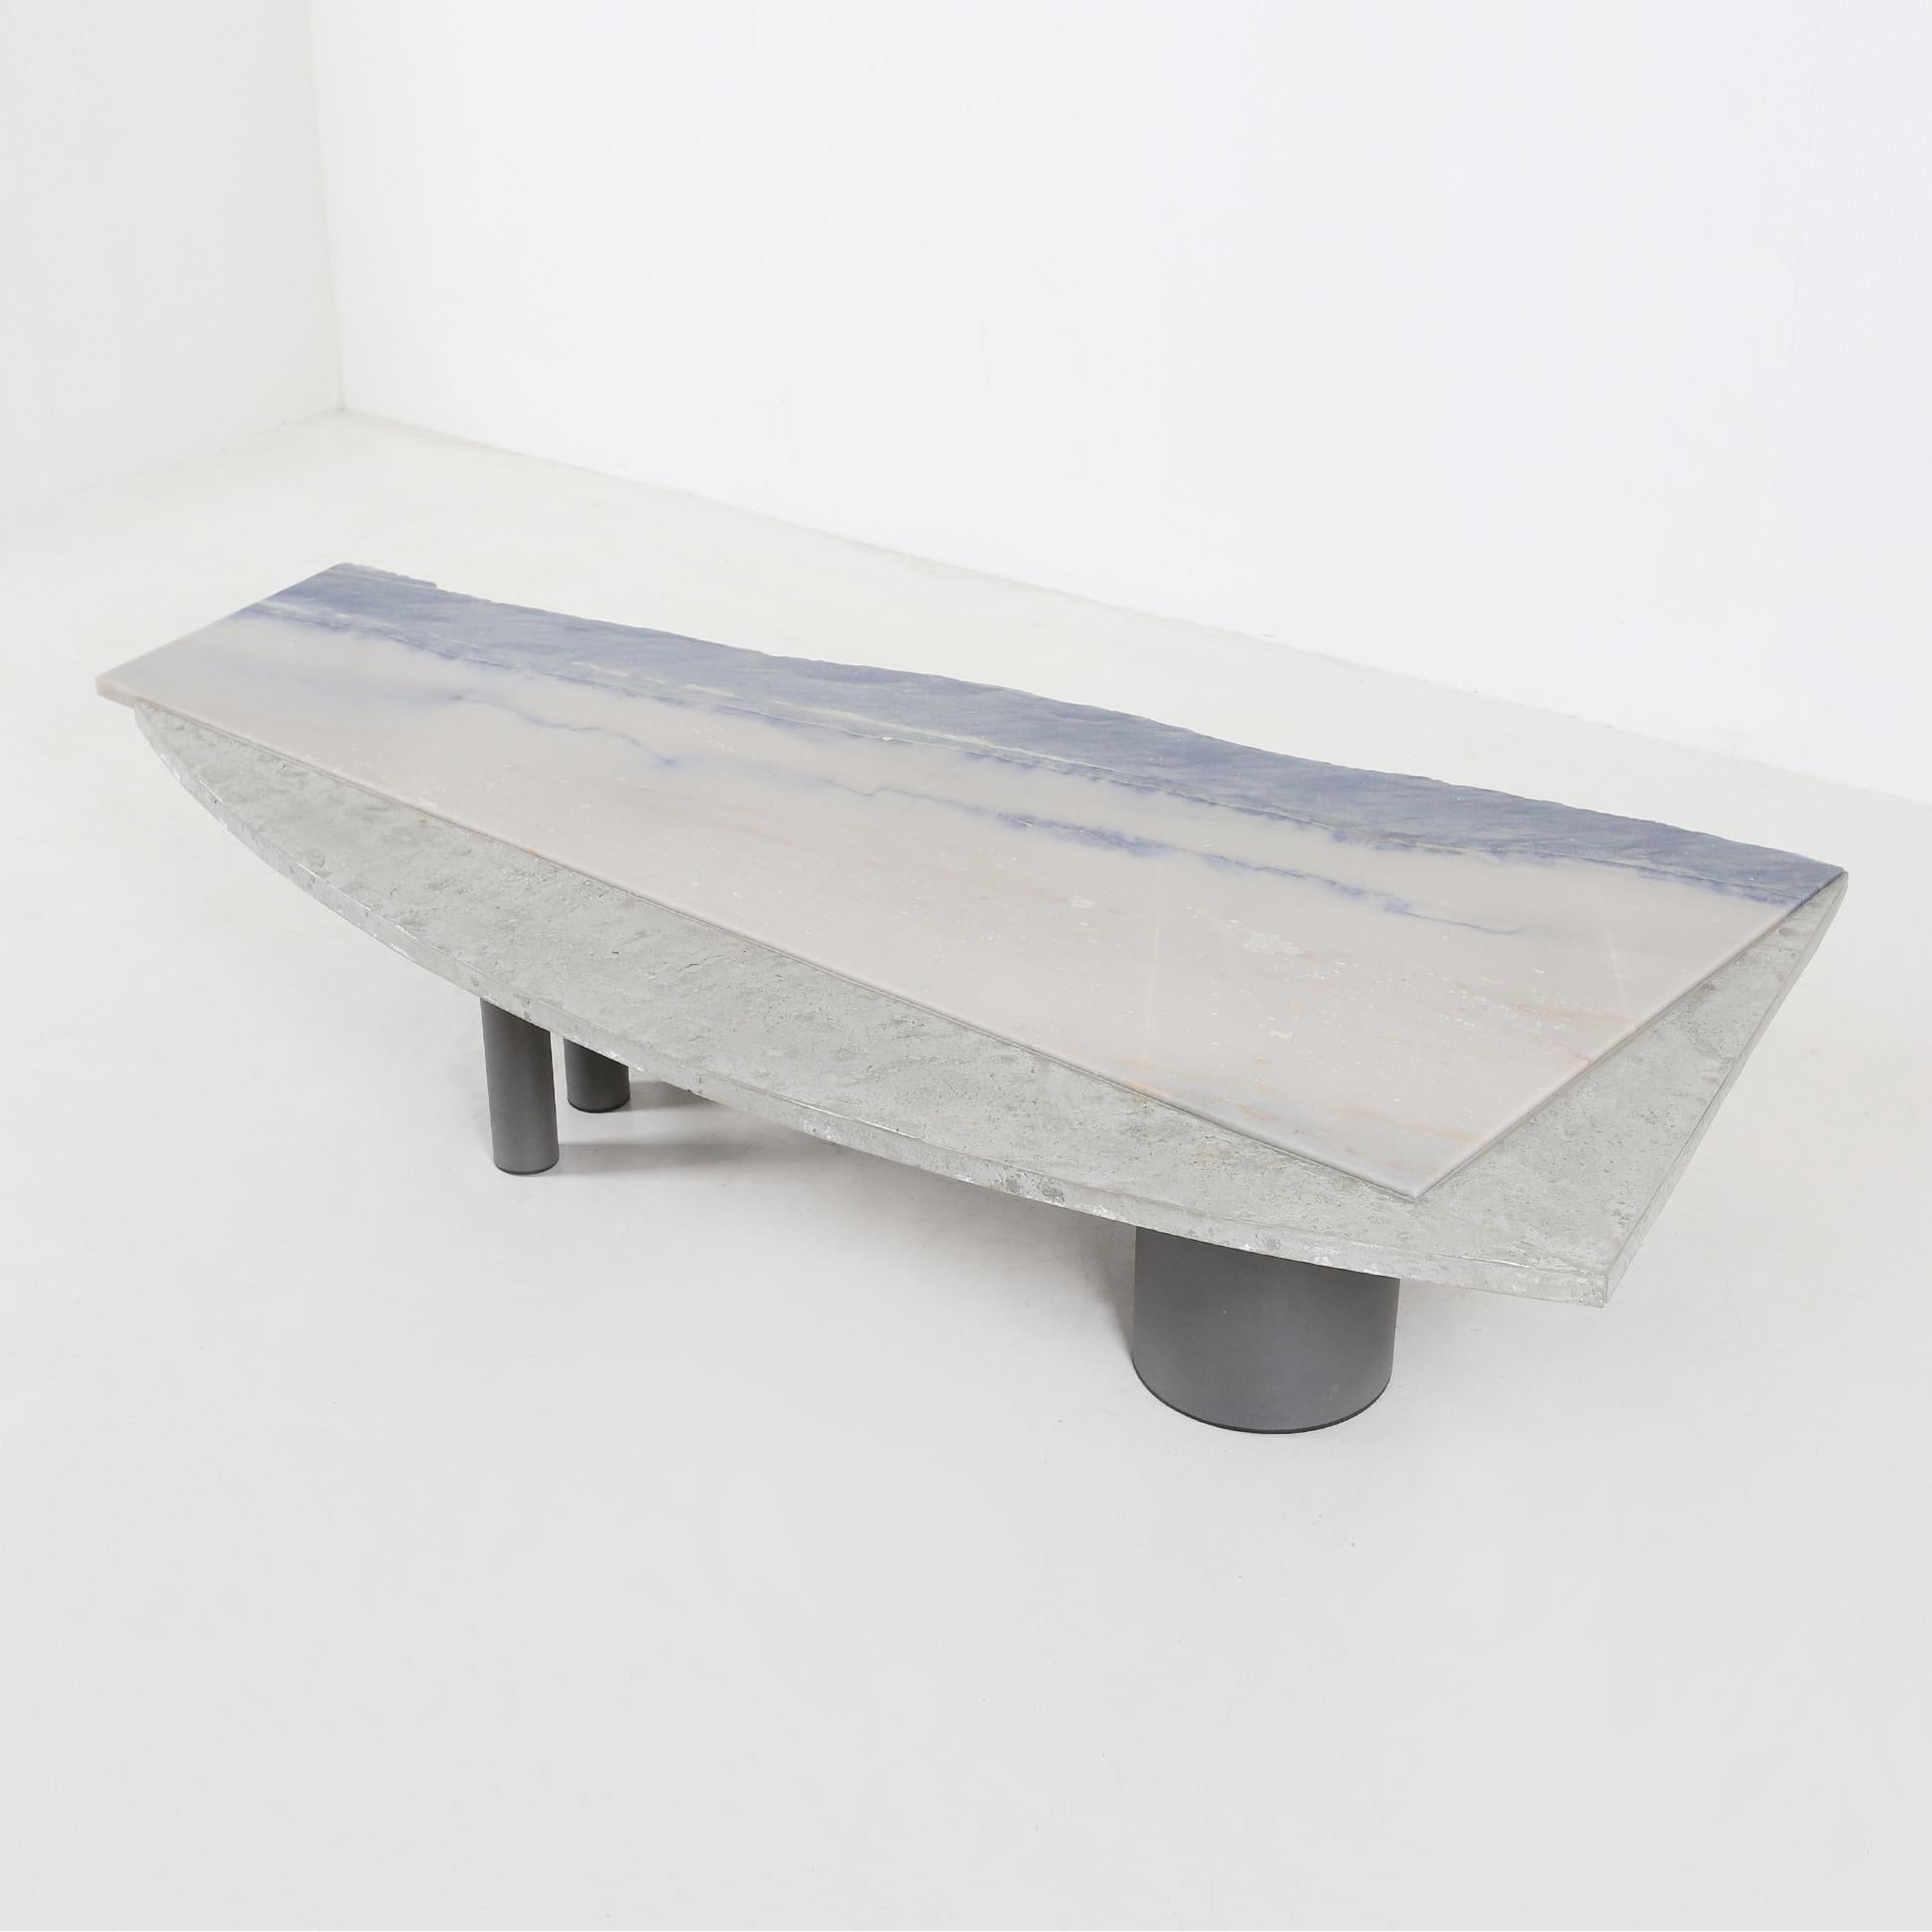 Rare Pia Manu table with a natural stone in dark blue and a metal tin edge.
The dark blue of the natural stone gives the table an exclusive and calm look.
This item is made with the greatest care and the best material.